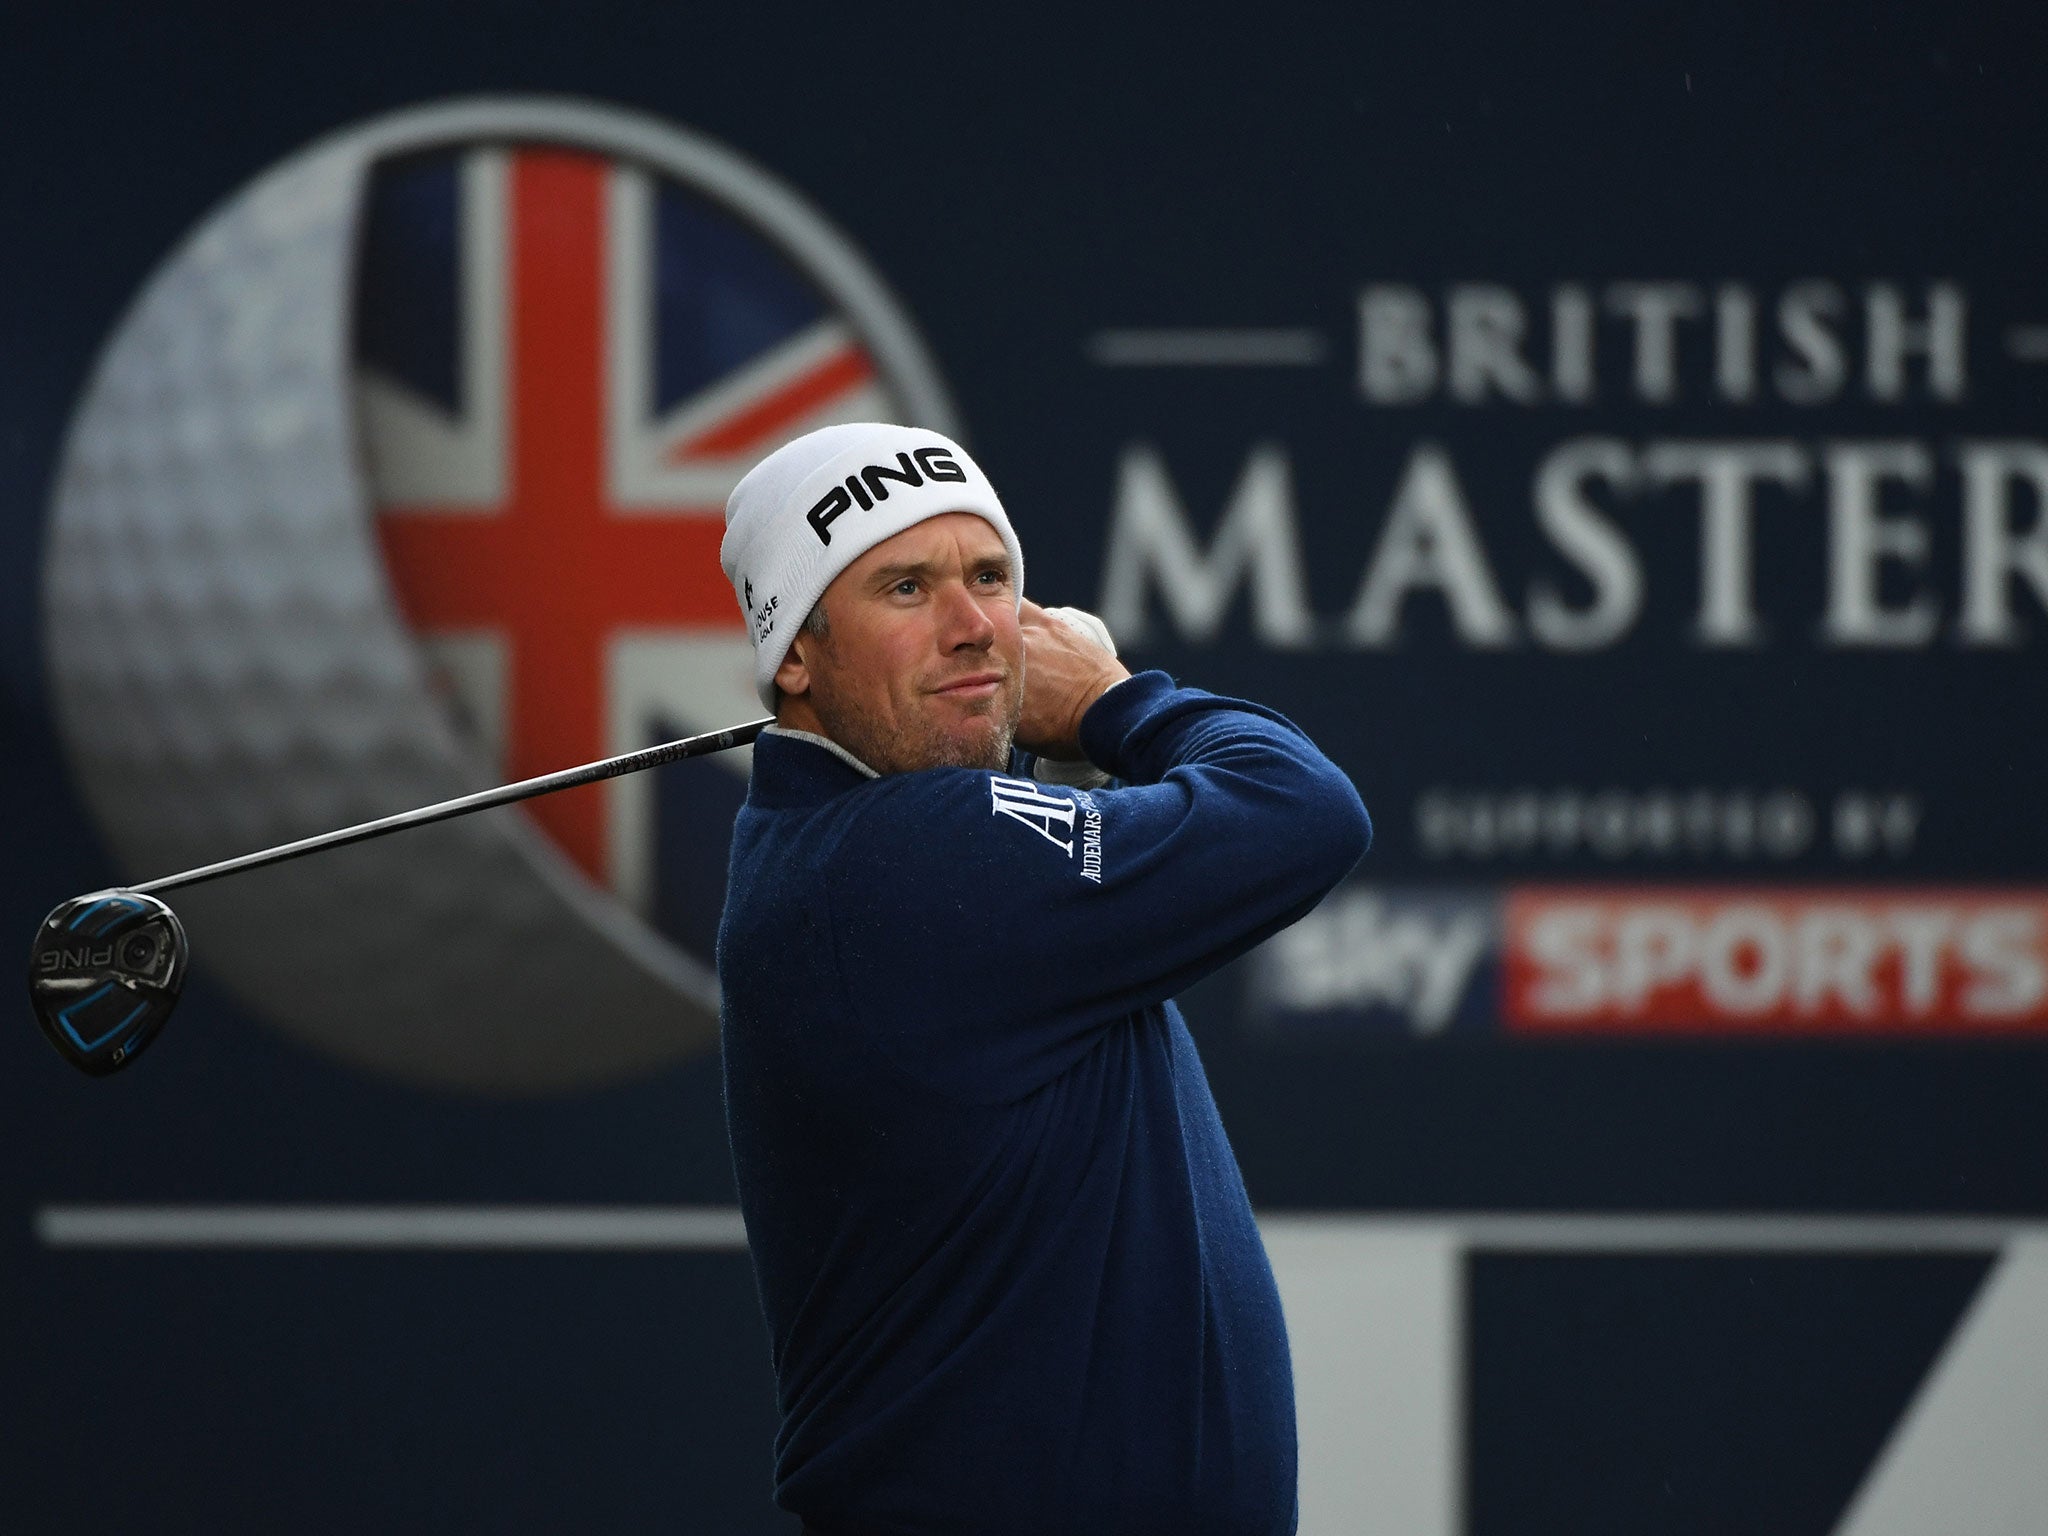 Lee Westwood was back in form at the British Masters after a poor Ryder Cup